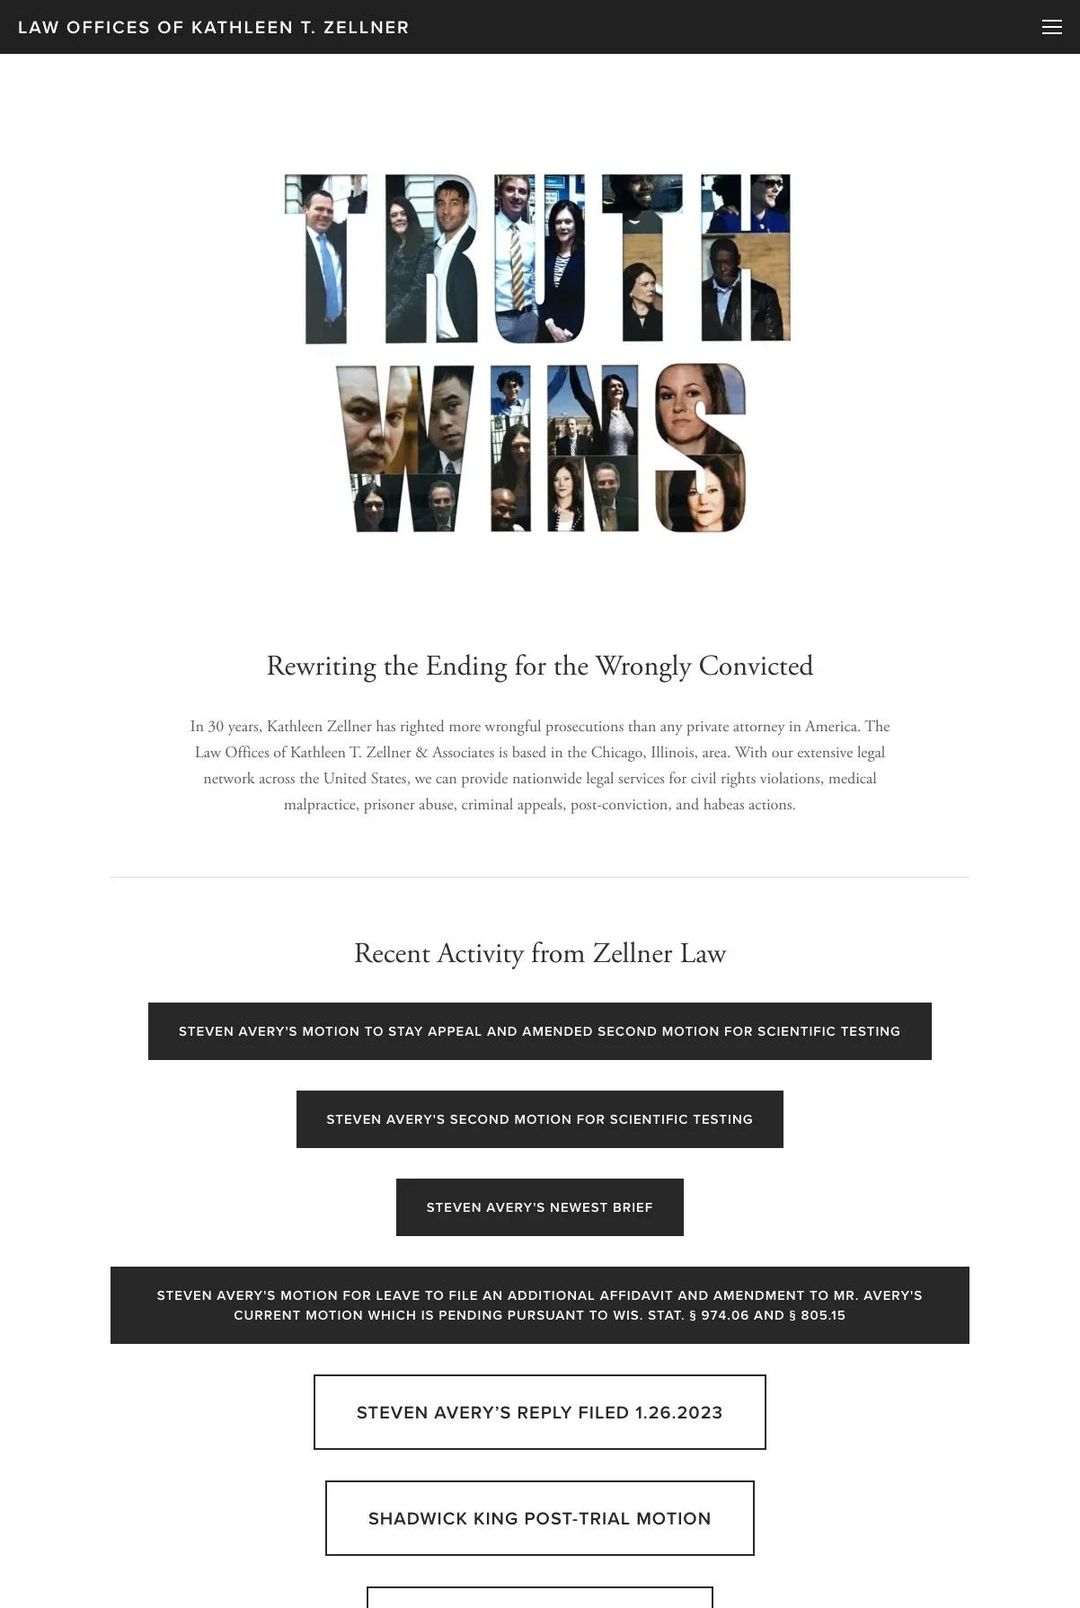 Screenshot 1 of Law Offices of Kathleen T. Zellner & Associates (Example Squarespace Law Firm Website)